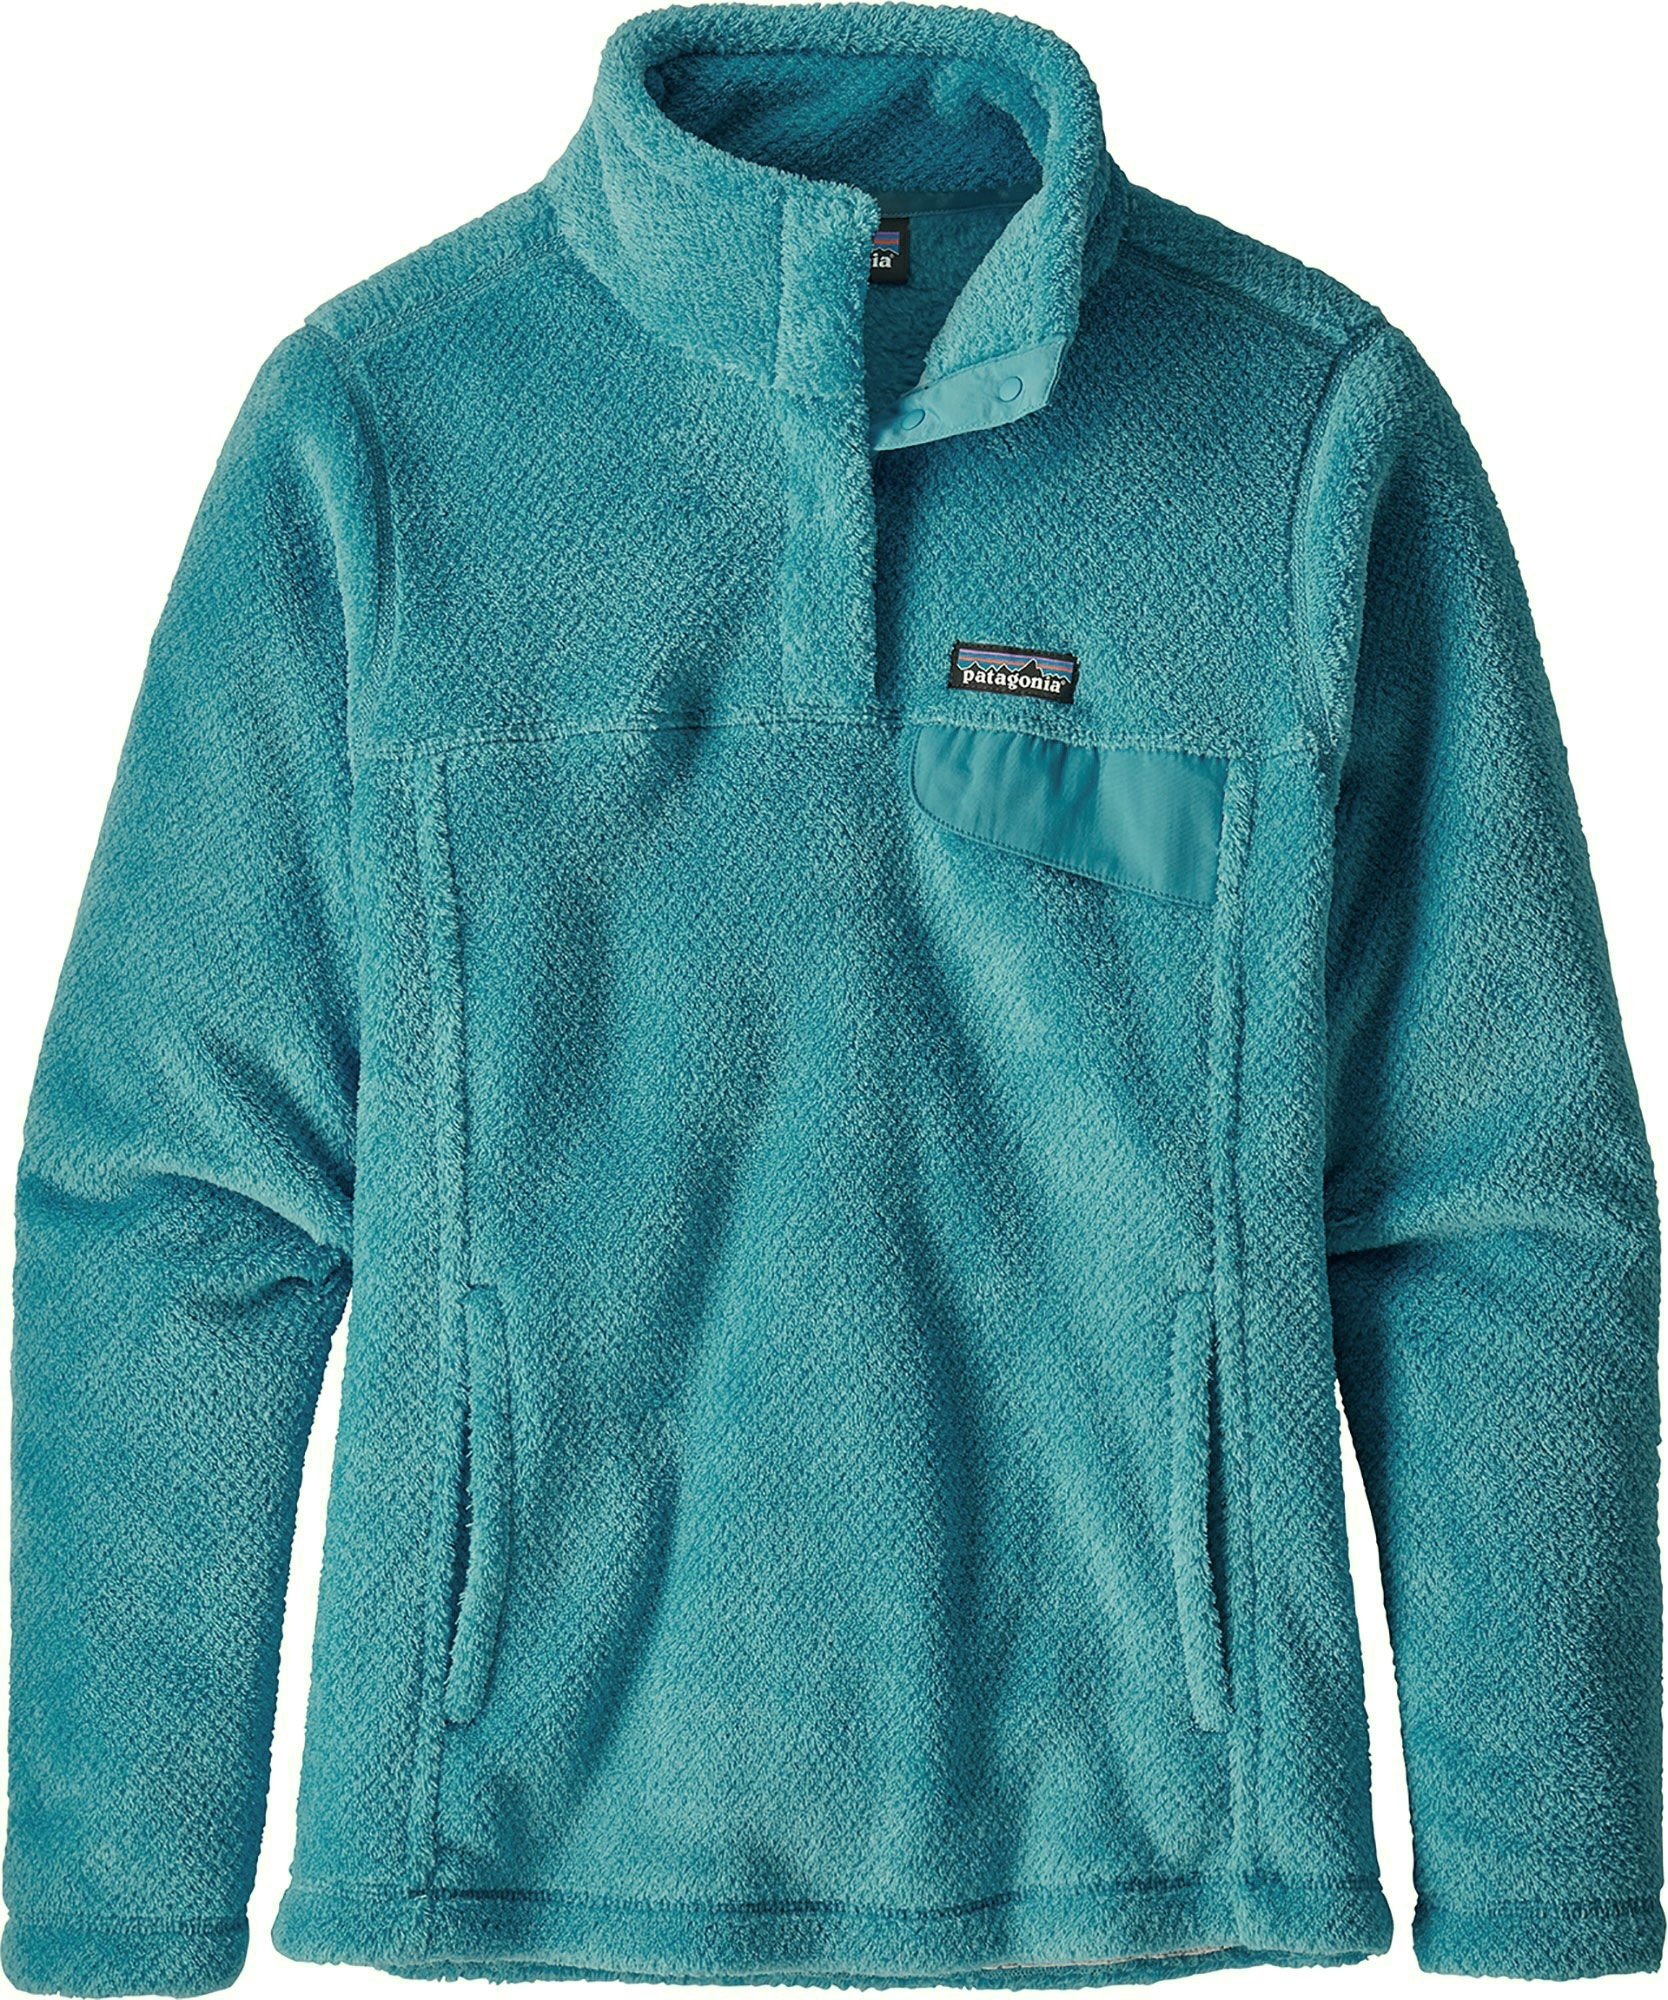 Patagonia W's Re-Tool Snap-T Fleece Pullover - Mogul Blue X Dye - Small